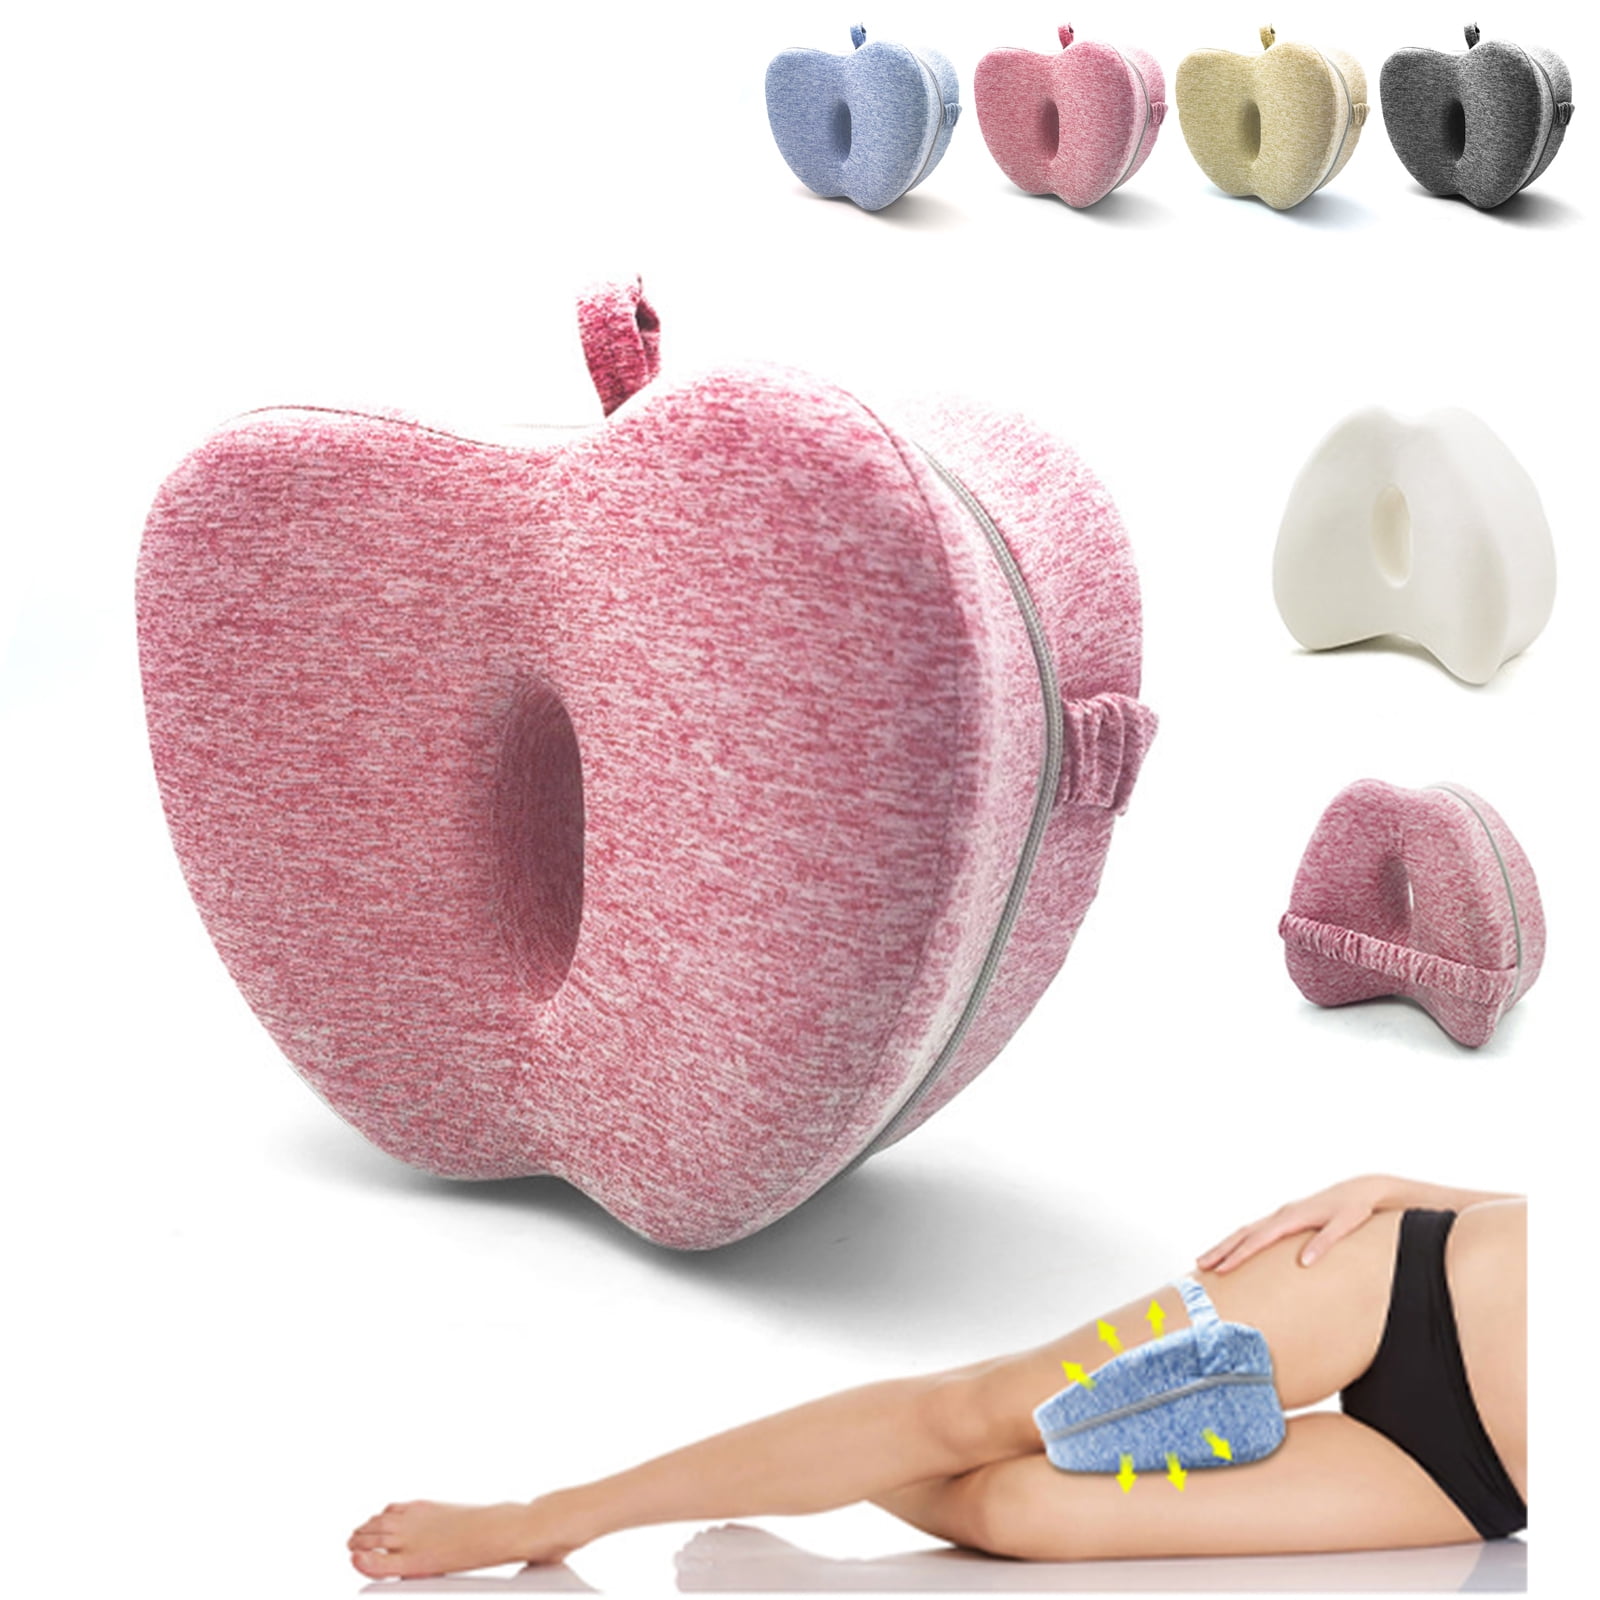  GUCABE Smoothspine Alignment Pillow,Relieve Hip Pain